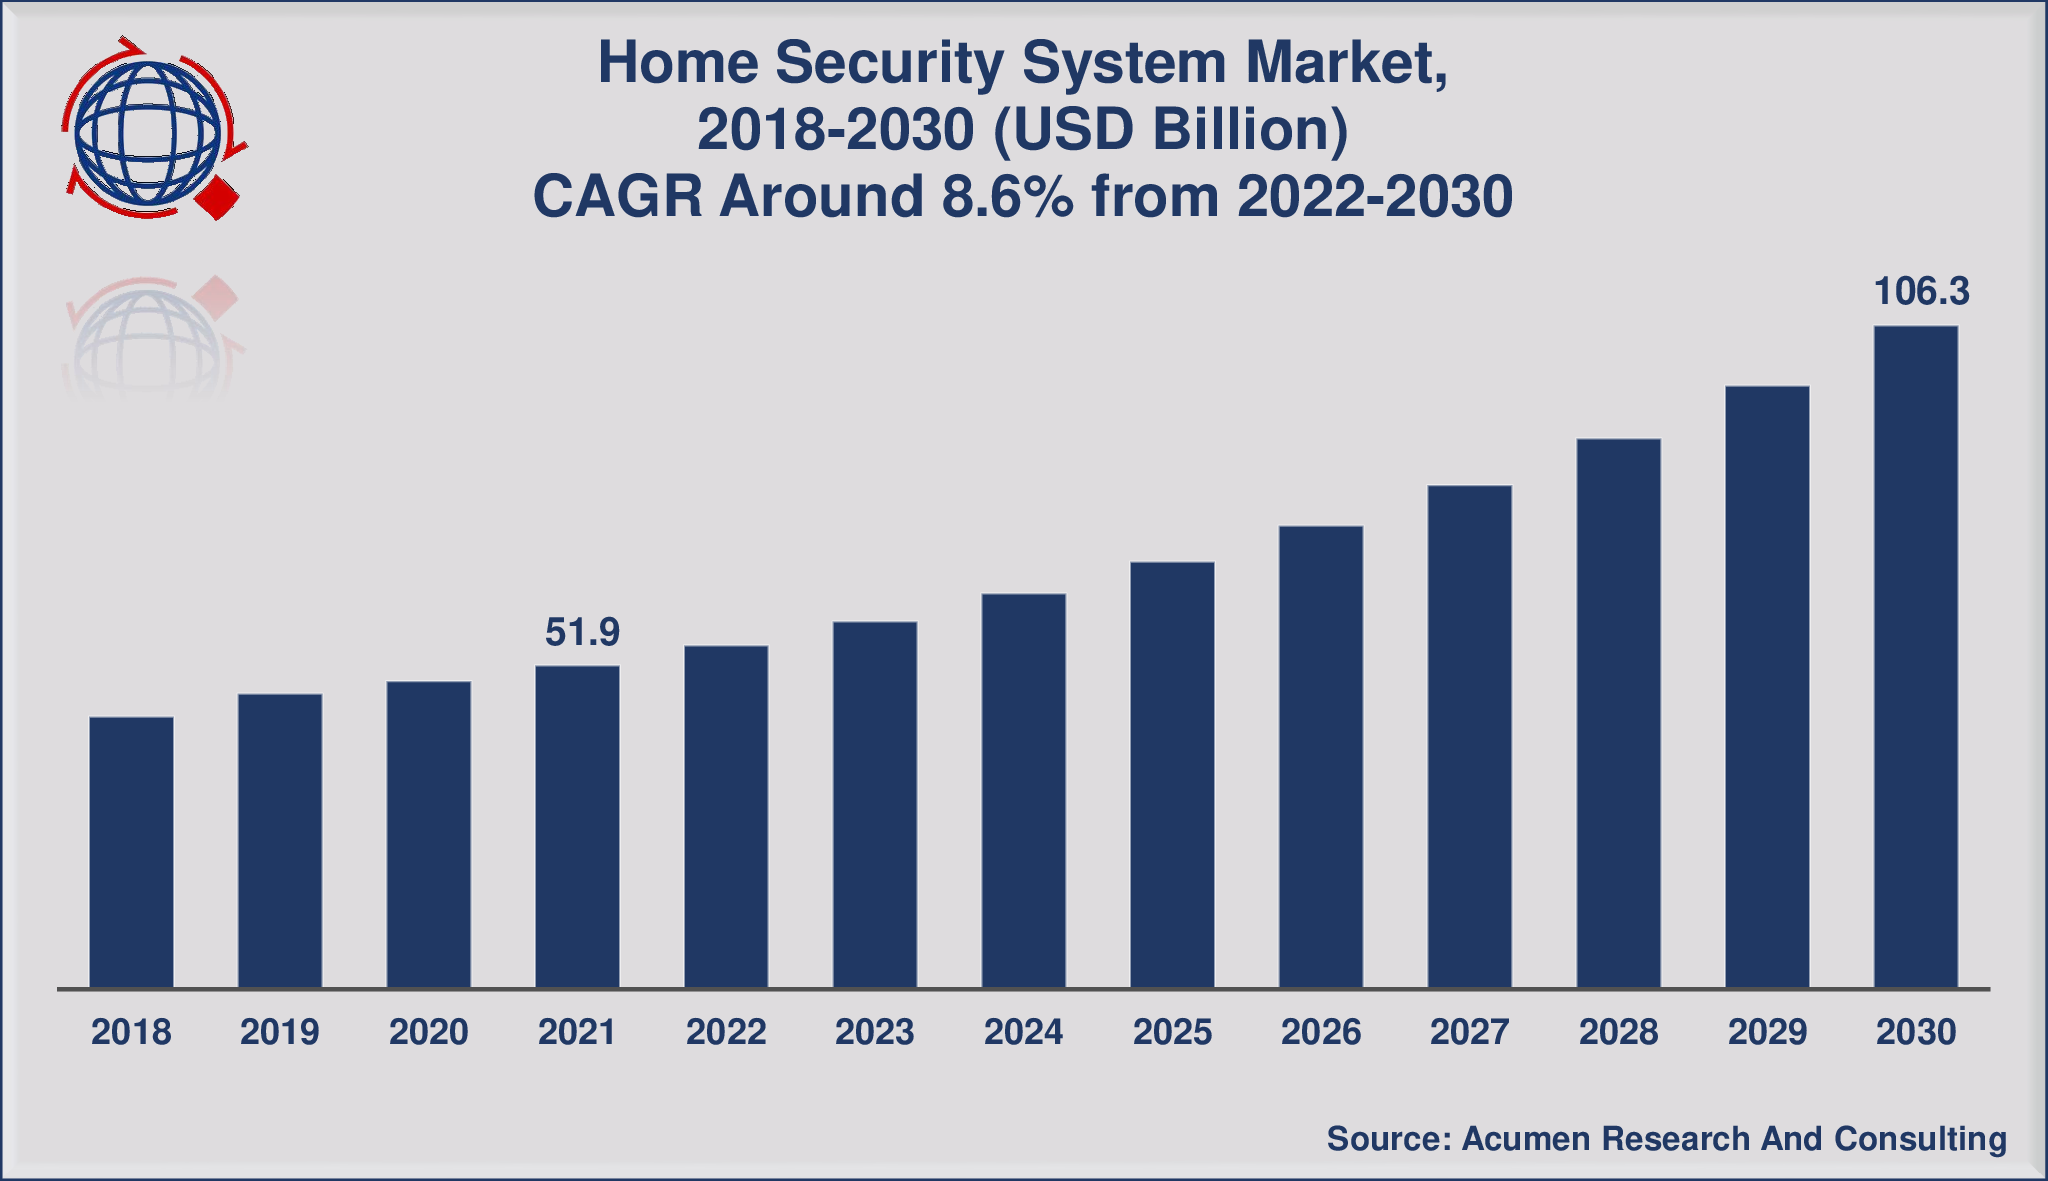 Residence Safety System Market Measurement to Contact USD 106.3 Billion